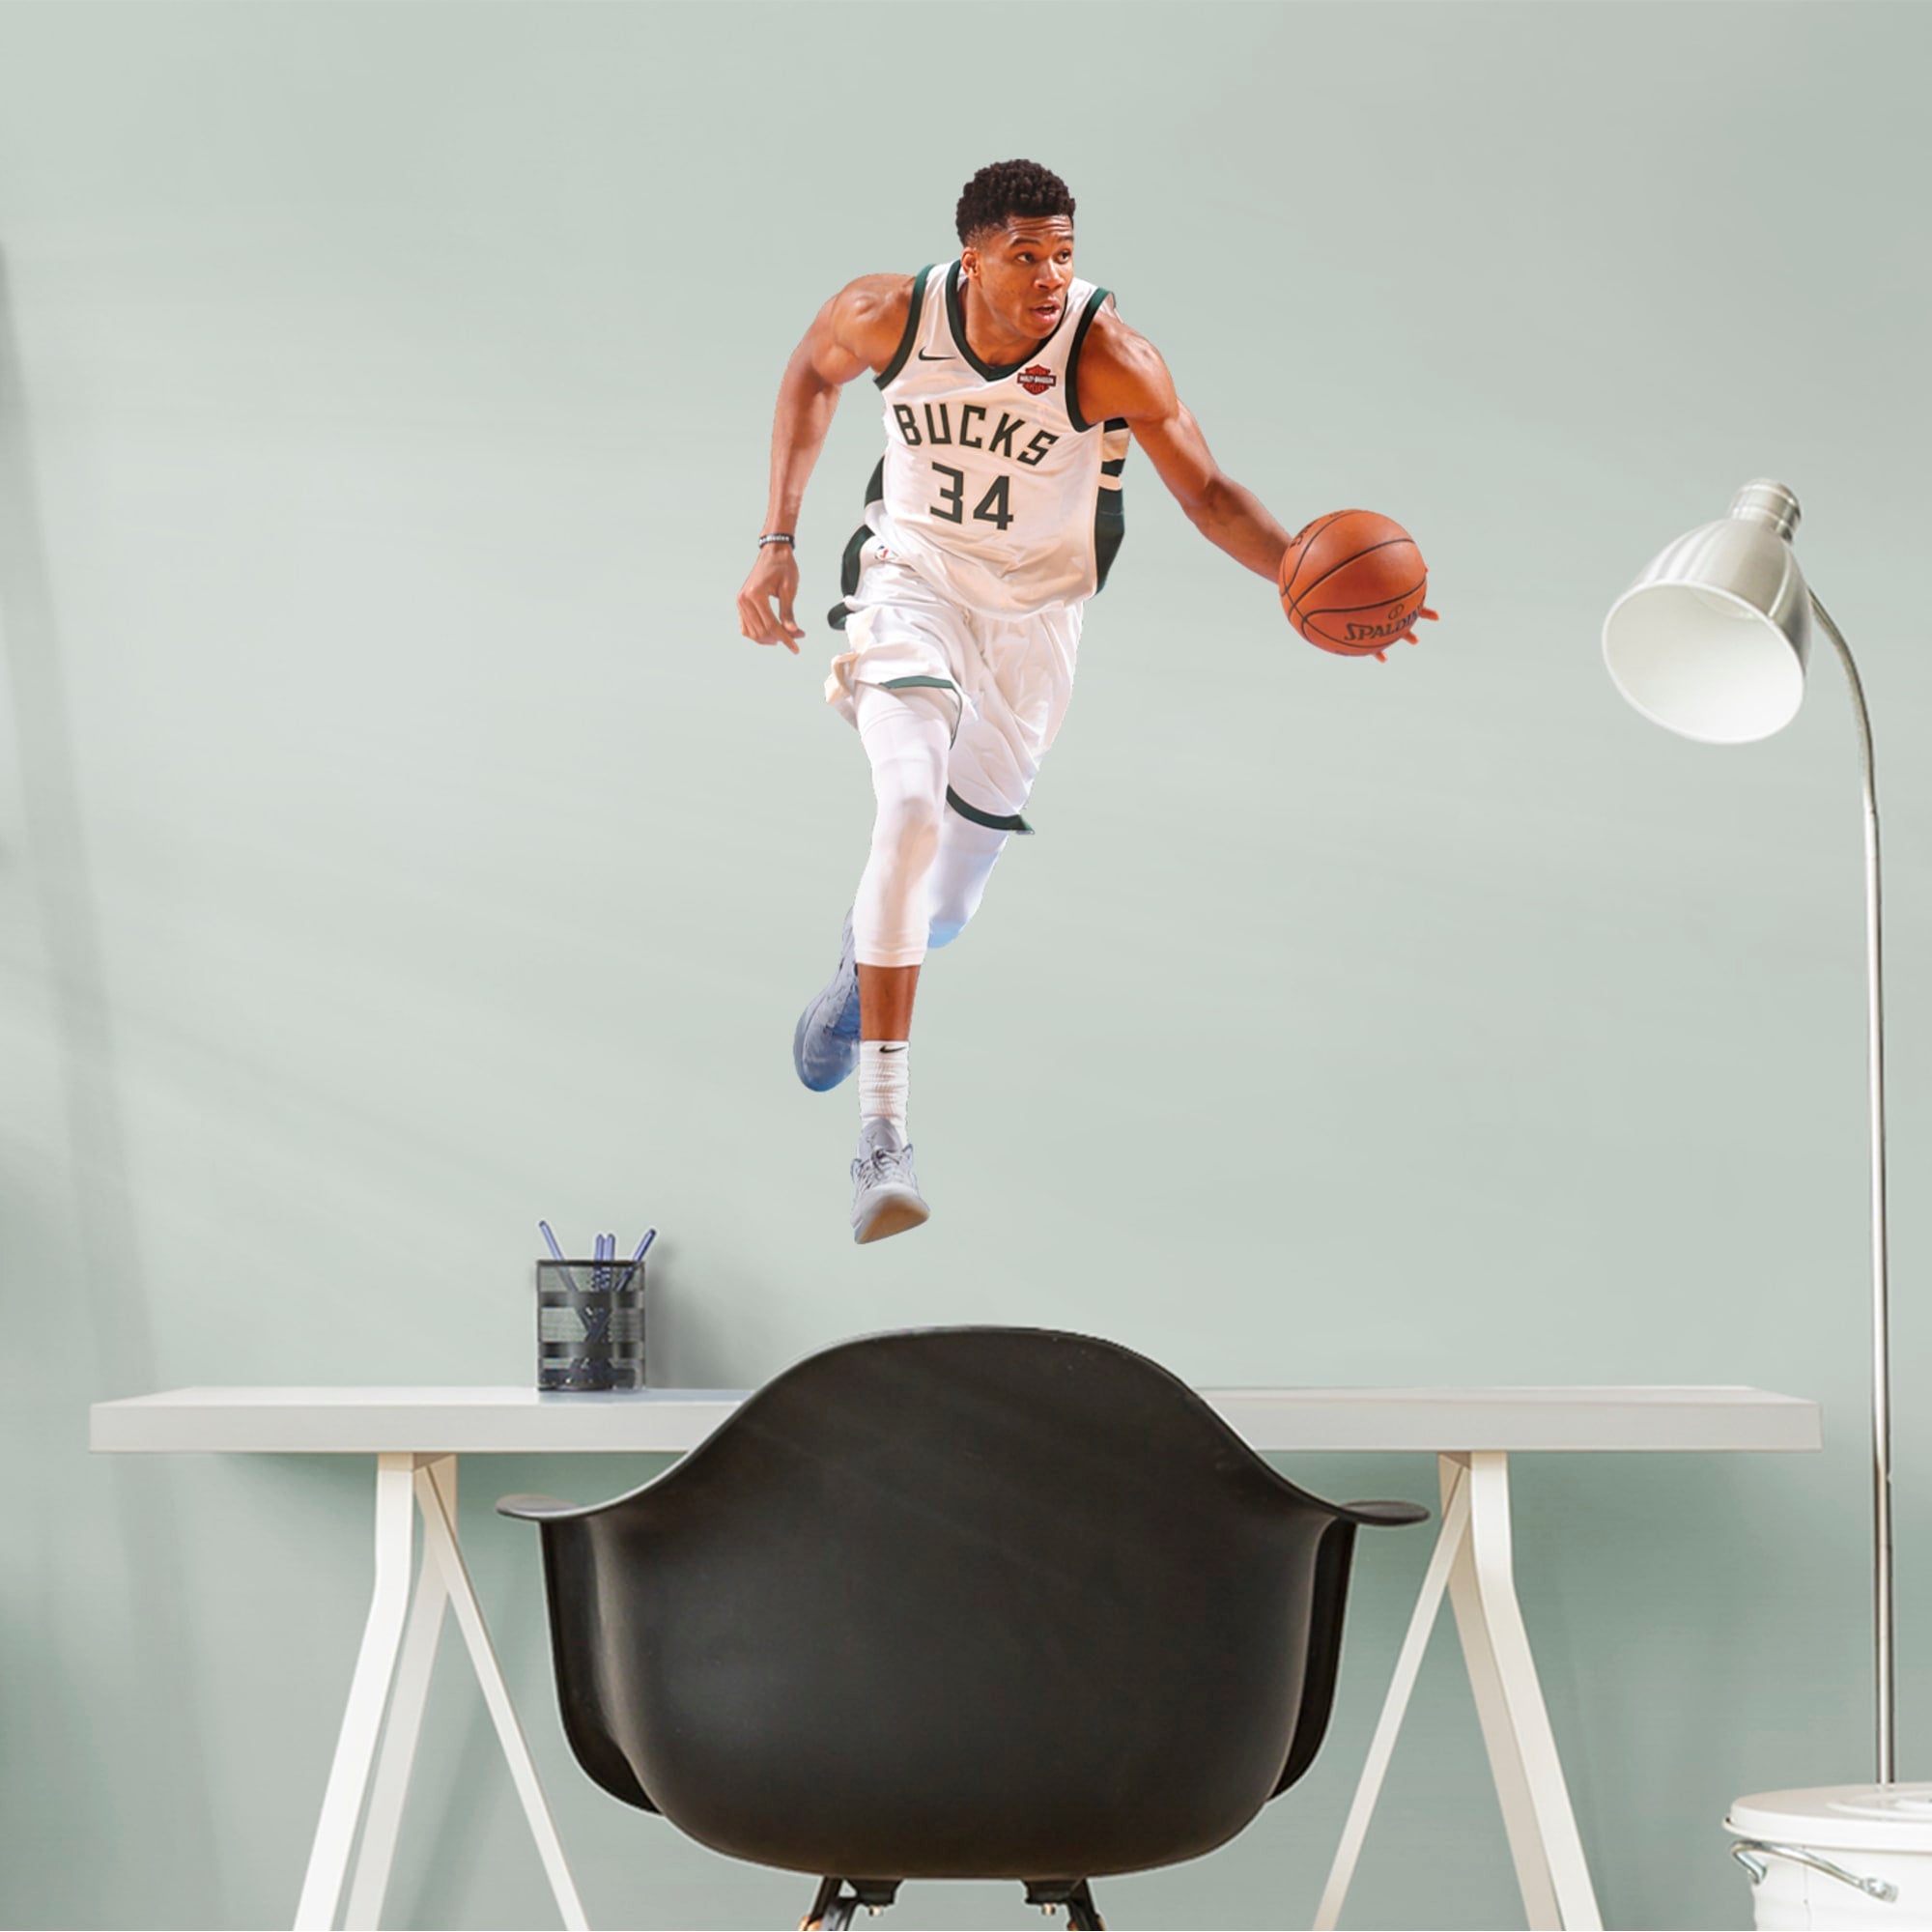 Giannis Antetokounmpo for Milwaukee Bucks - Officially Licensed NBA Removable Wall Decal 25.0"W x 38.0"H by Fathead | Vinyl